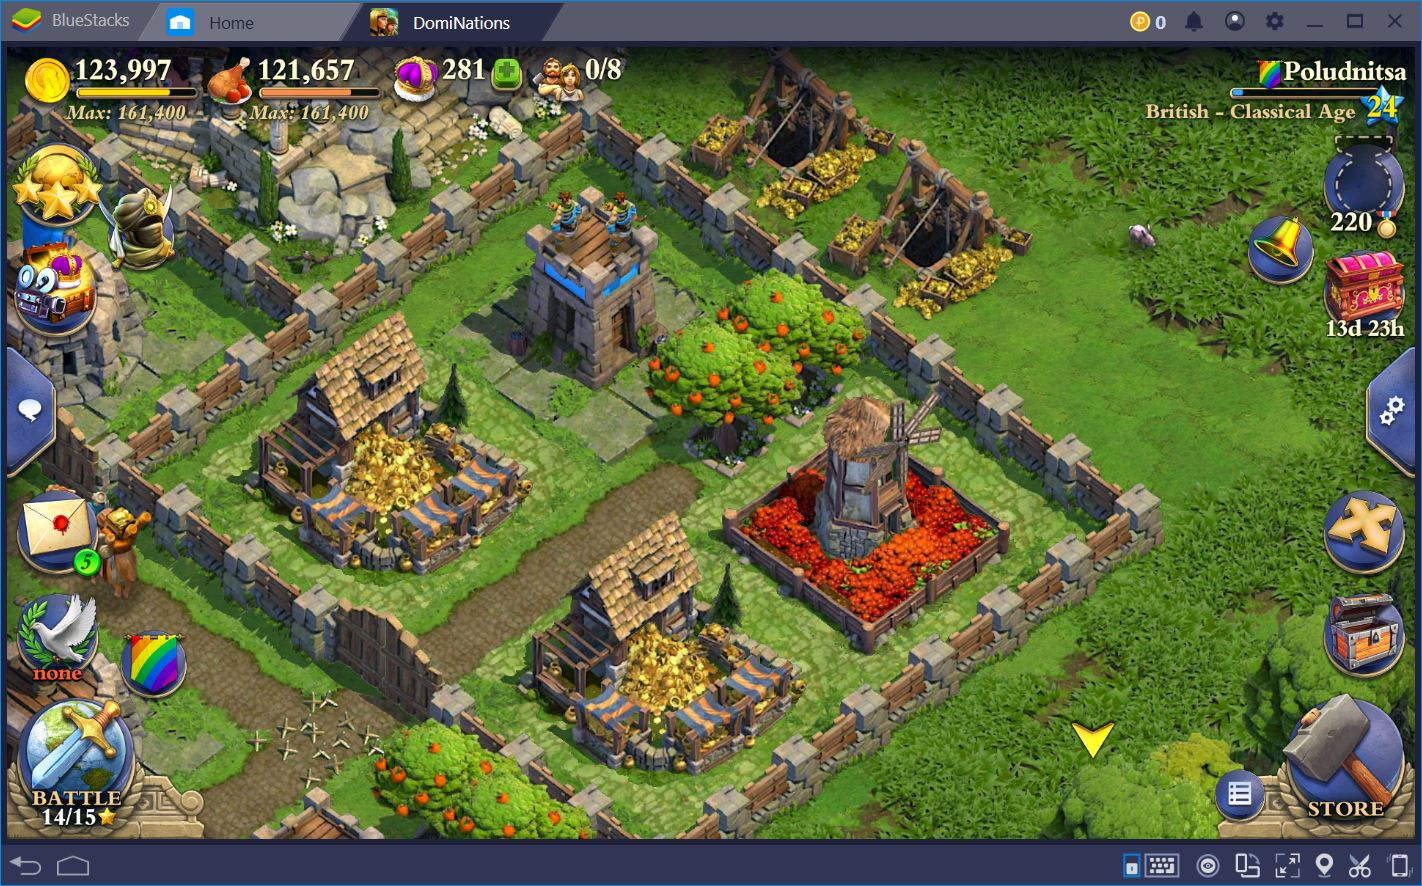 dominations industrial age war base layout